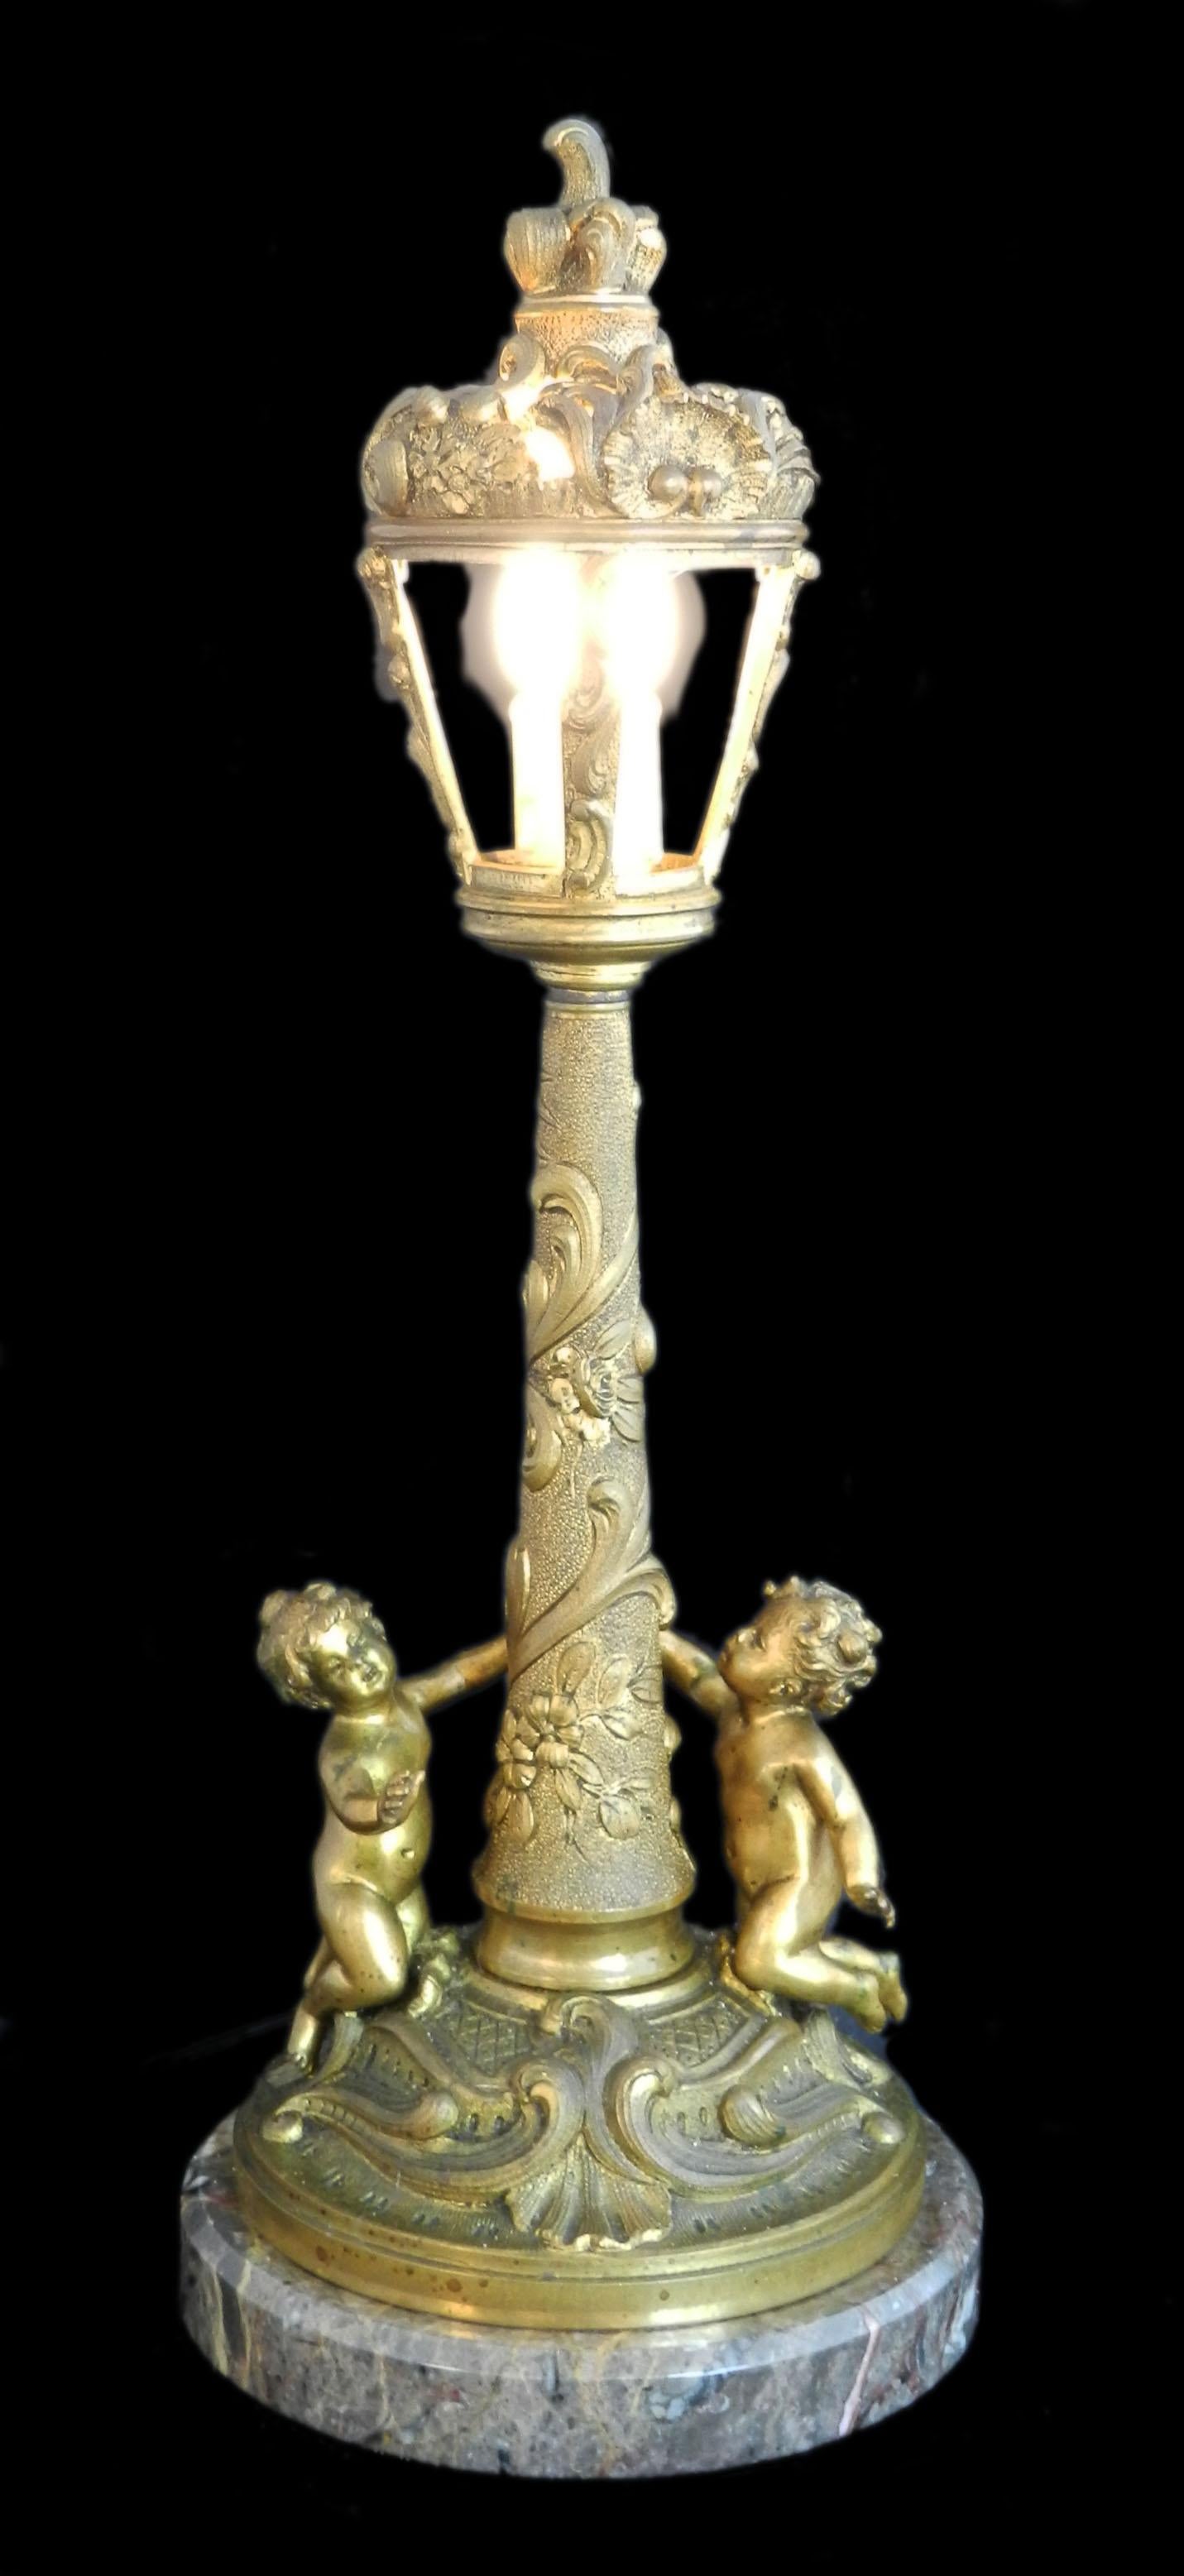 Antique Cherub Lamp French Light c1900-1910
Unusual Light with a pair of cherubs in gilded bronze
On a Marble Base
Revised and restored to it's former glory, please just add a plug....
Night Light
Good antique condition with minor wear to the